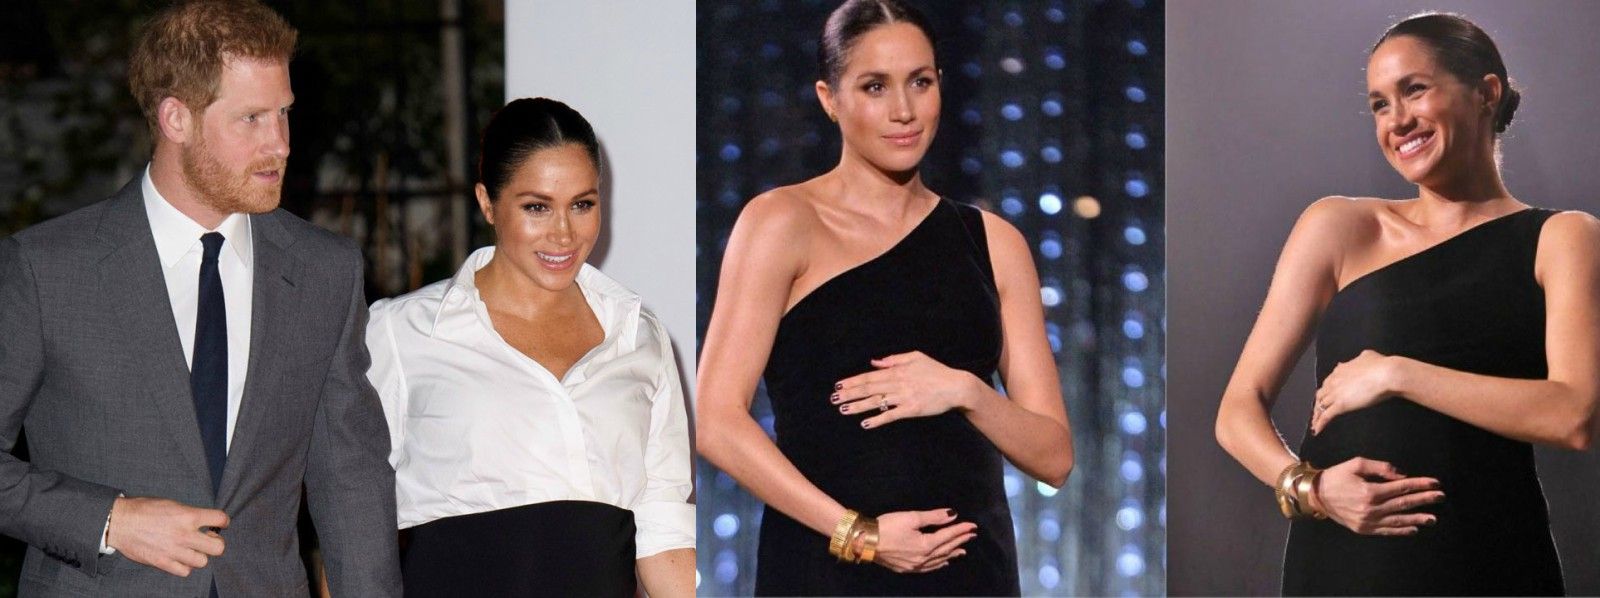 images easyblog articles 7694 meghan markle new baby a87a0177